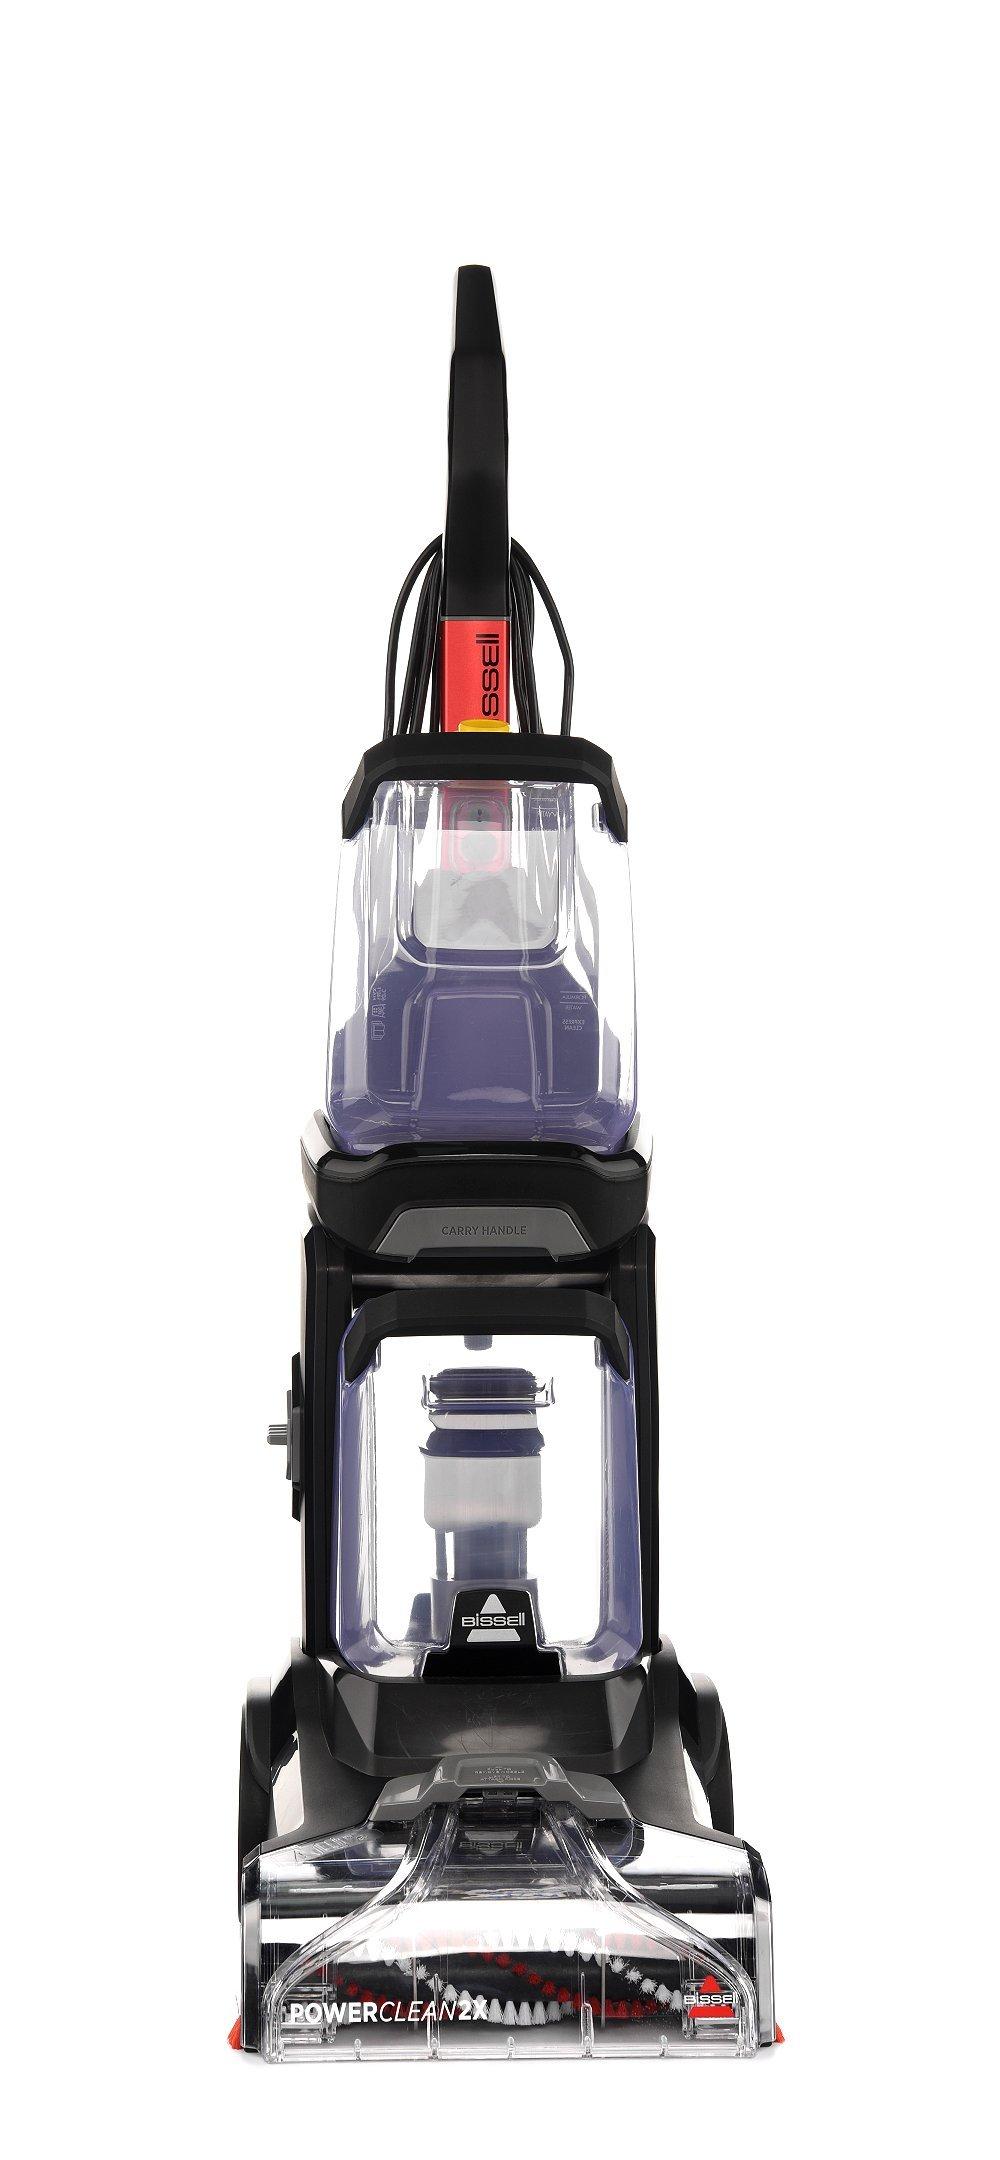 Bissell Spot Cleaner, Dual Tank System, 750W, Black - eXtra Saudi